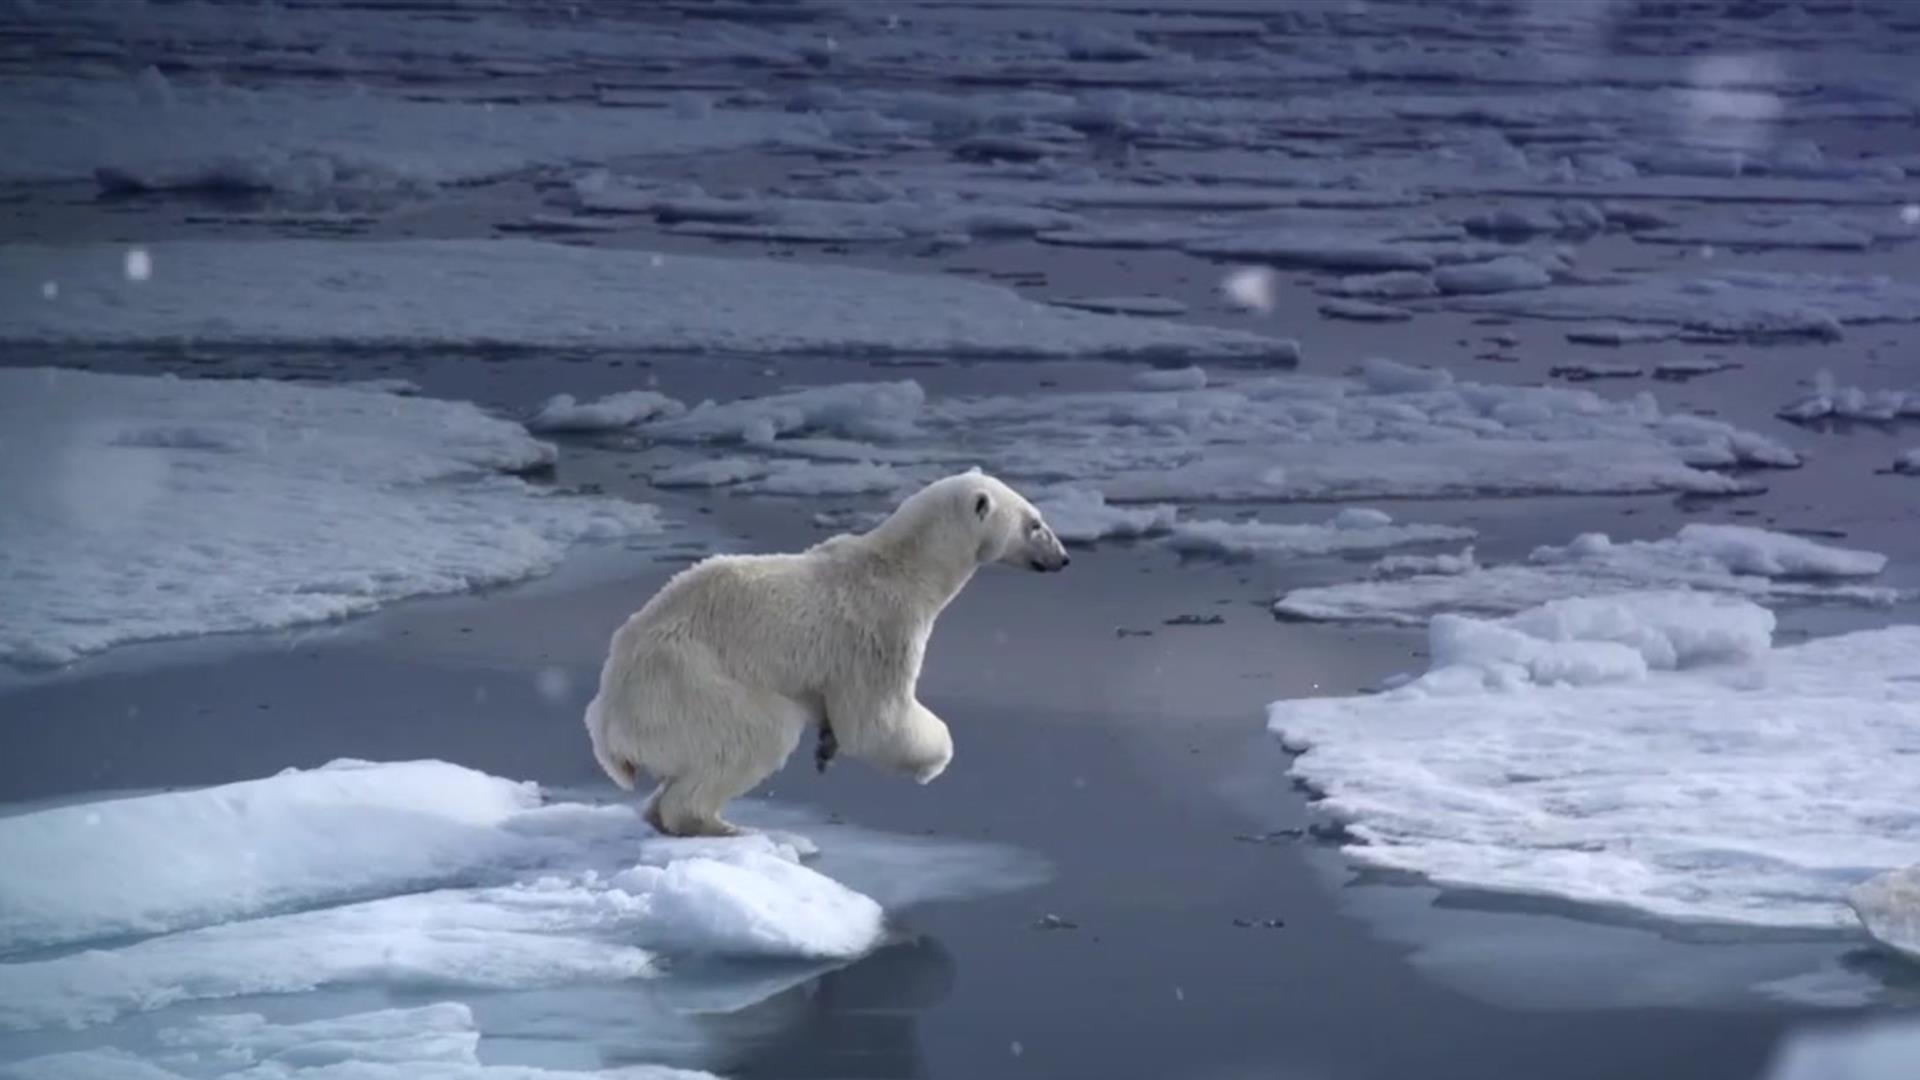 Surprising Polar Bear Facts About the King of the Arctic